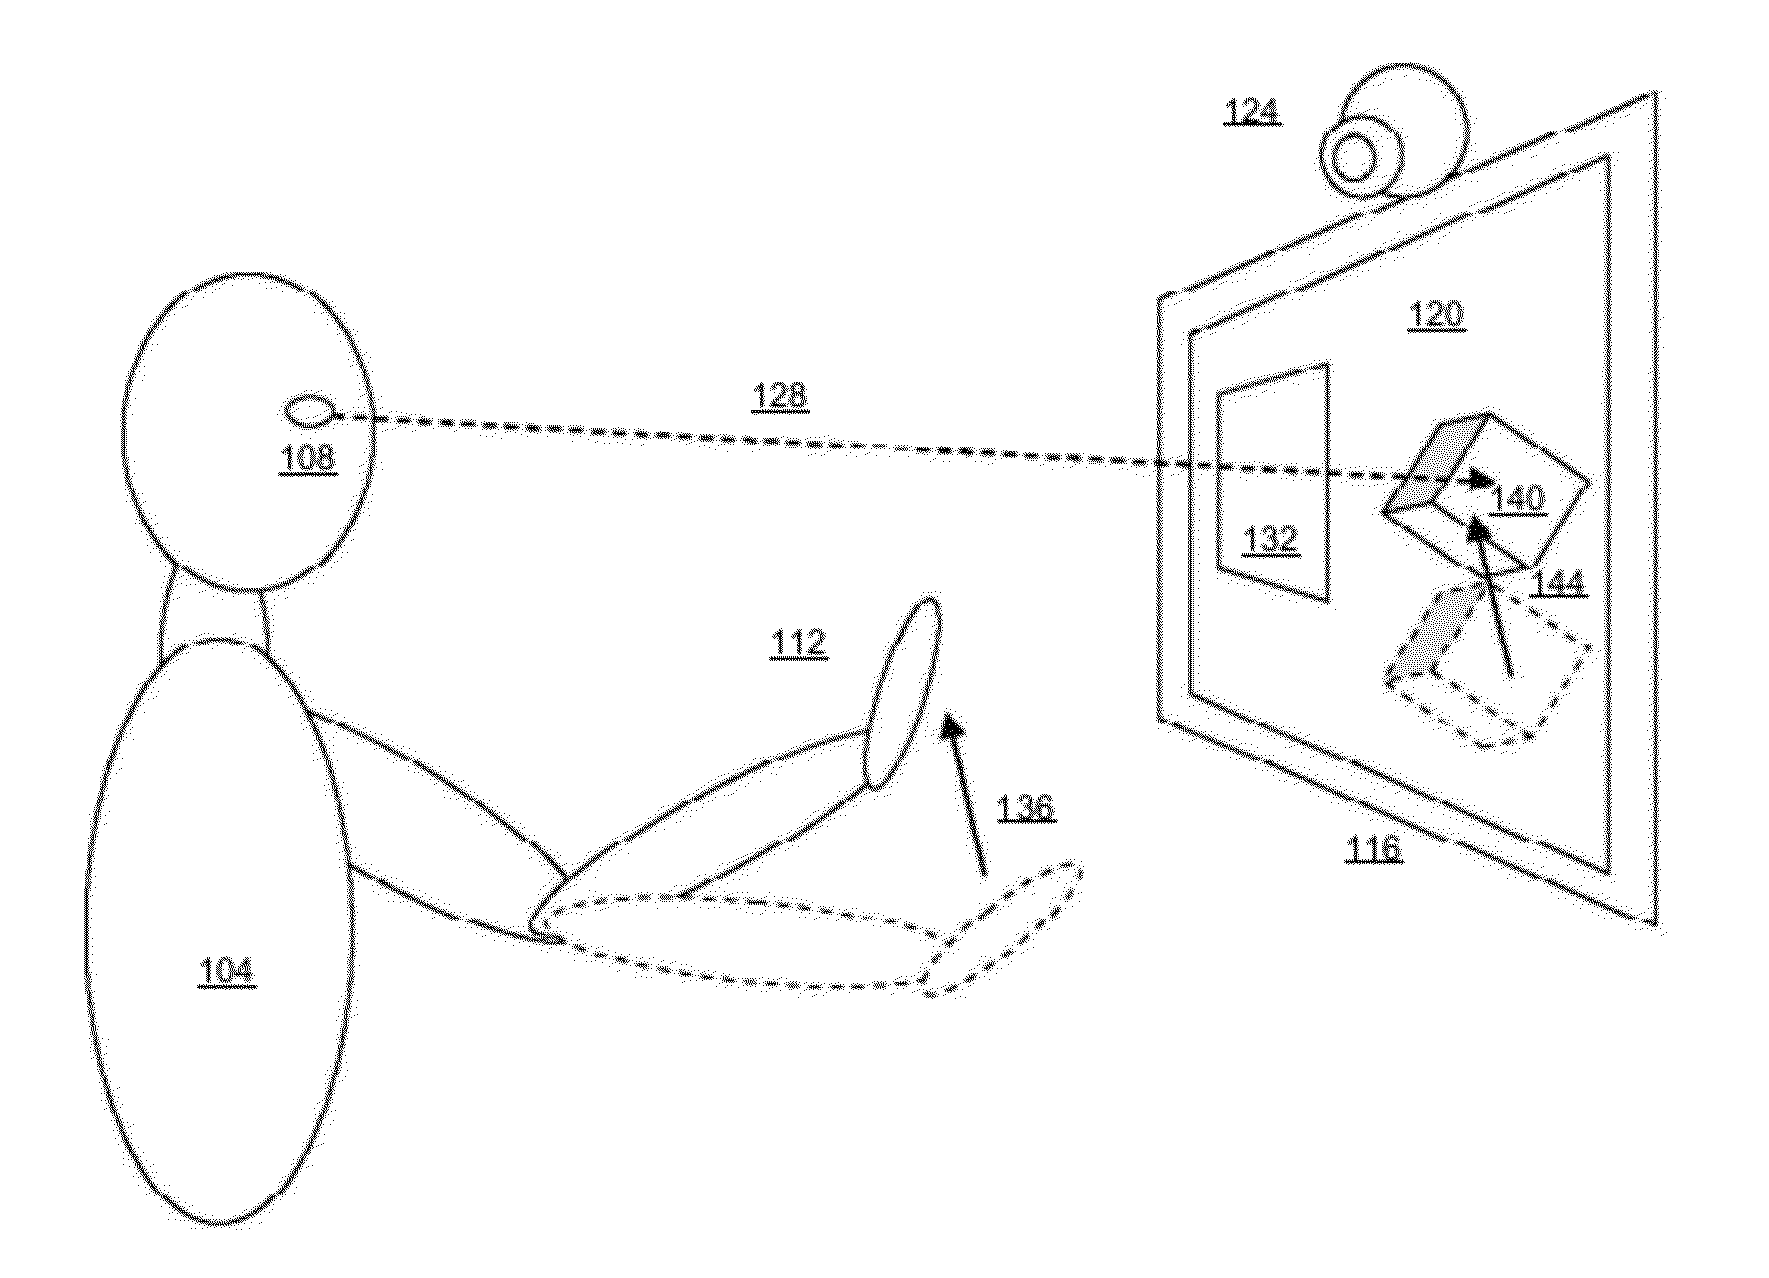 Systems and methods for providing feedback by tracking user gaze and gestures